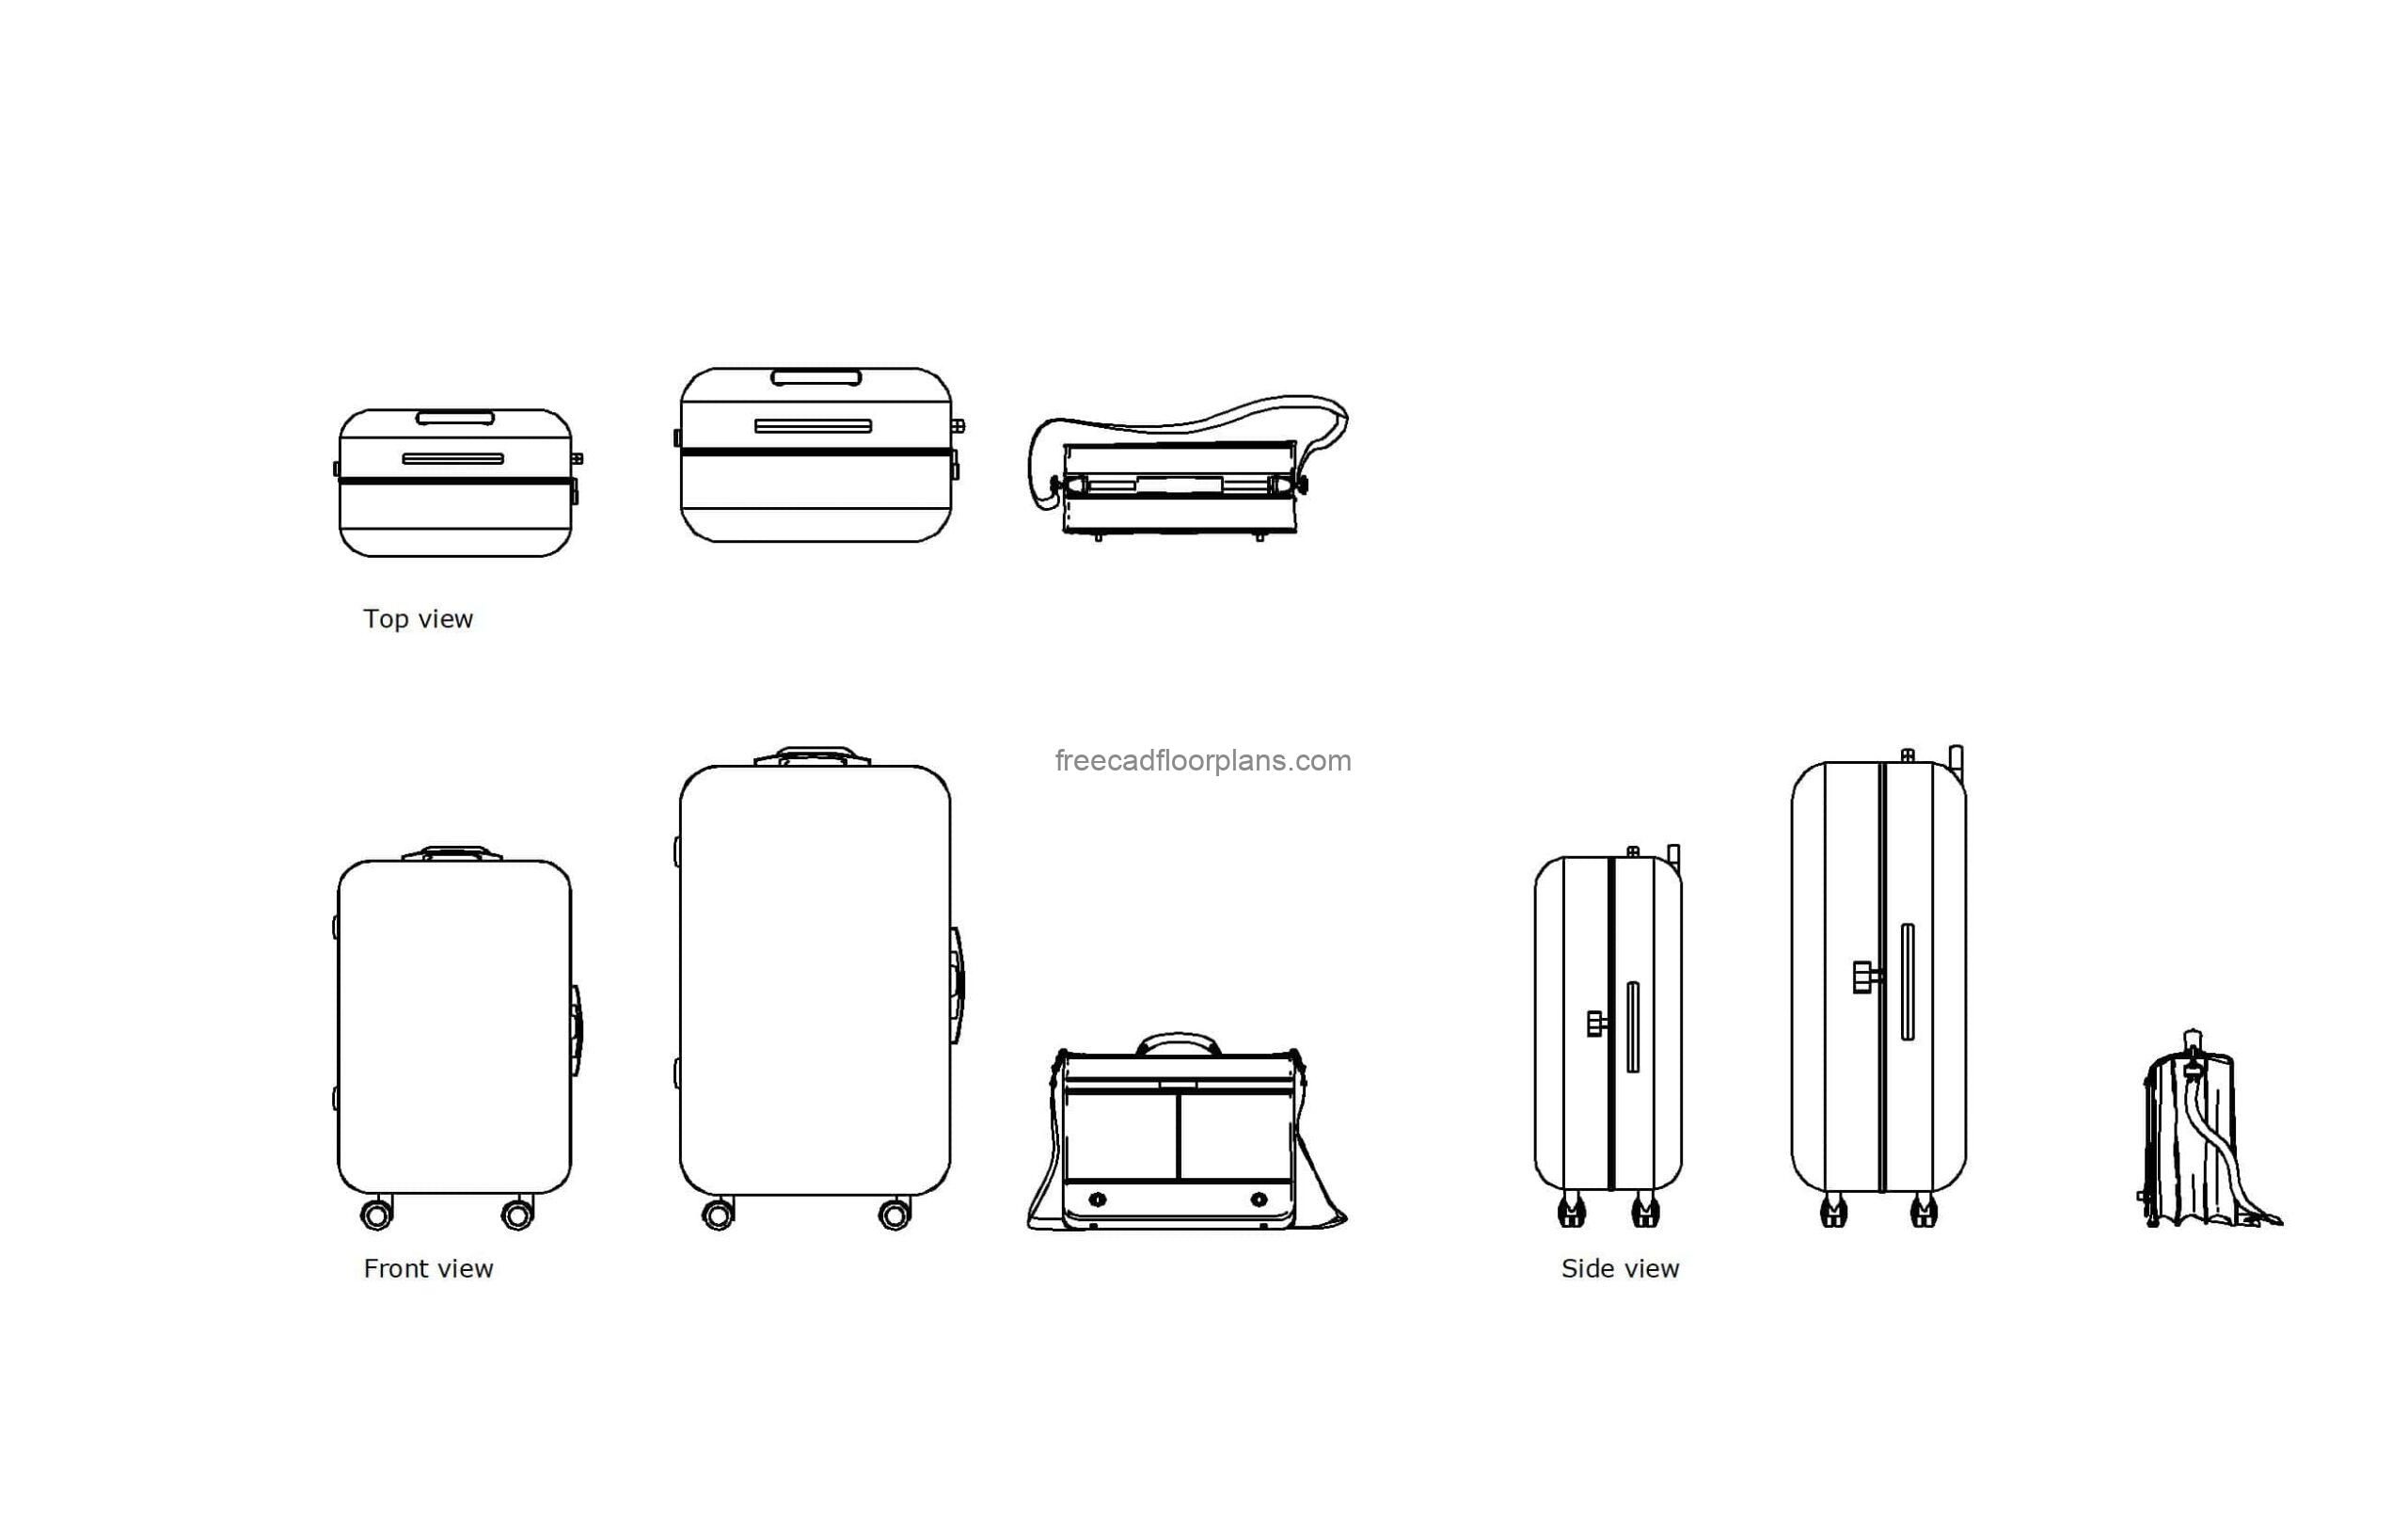 autocad drawing of different suitcases, dwg 2d views plan and elevation, file for free download